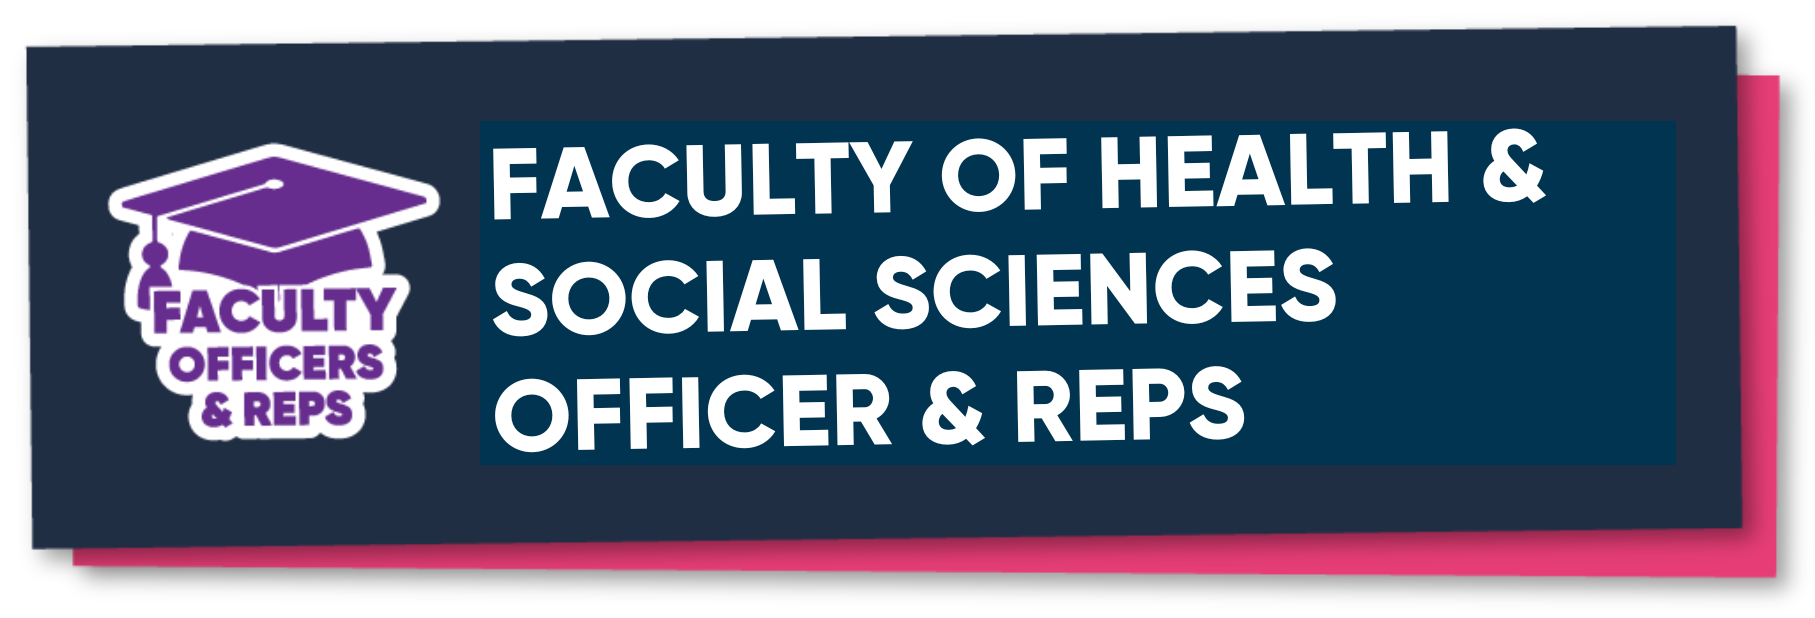 Faculty of Health & Social Sciences Officer & Rep Button